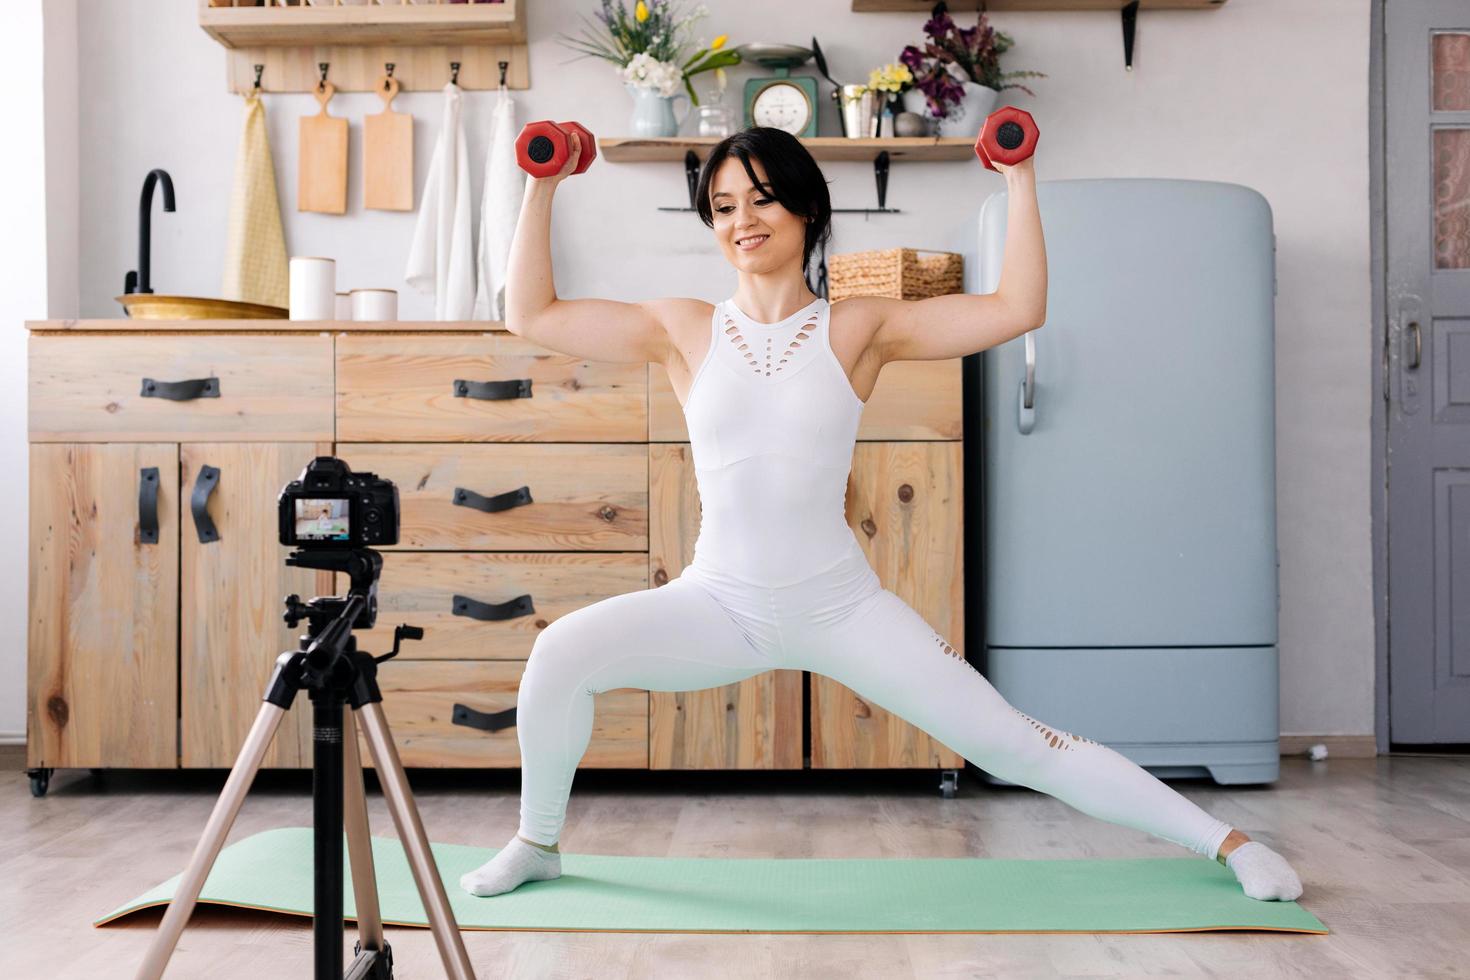 Online training. Joyful young woman making exercises while recording a video of a training photo